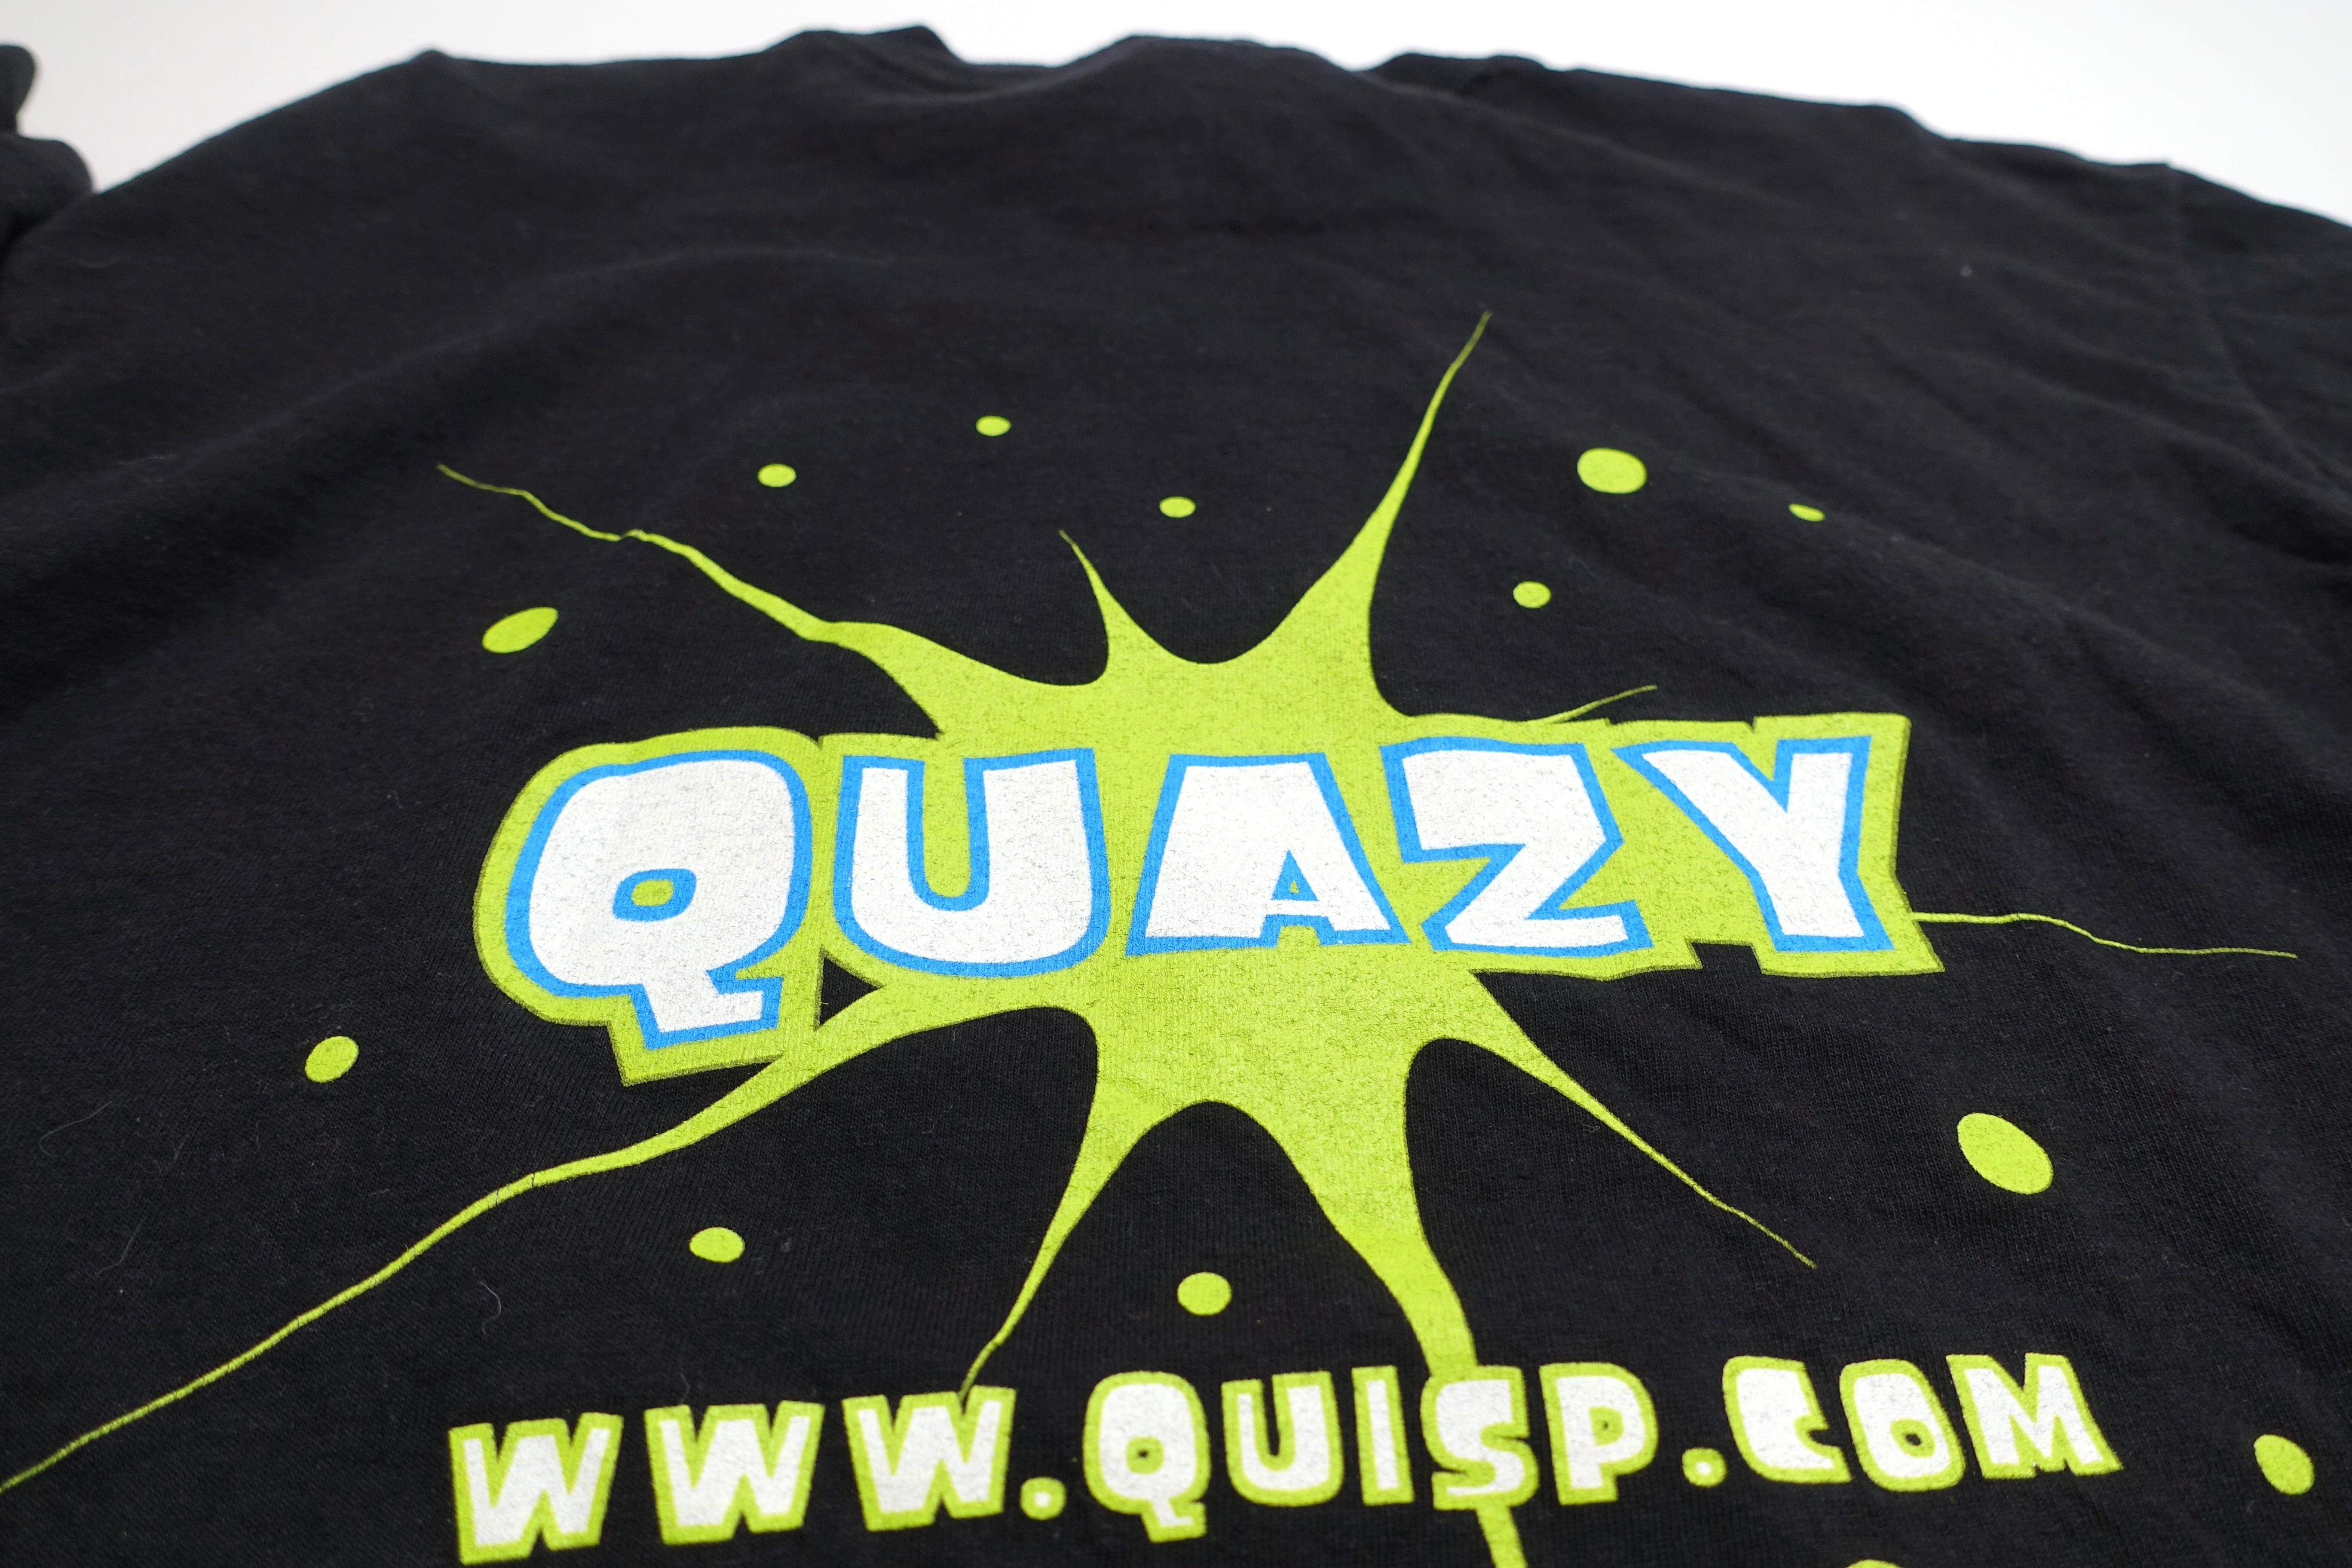 Quisp Cereal - Quazy Long Sleeve Shirt Size Large